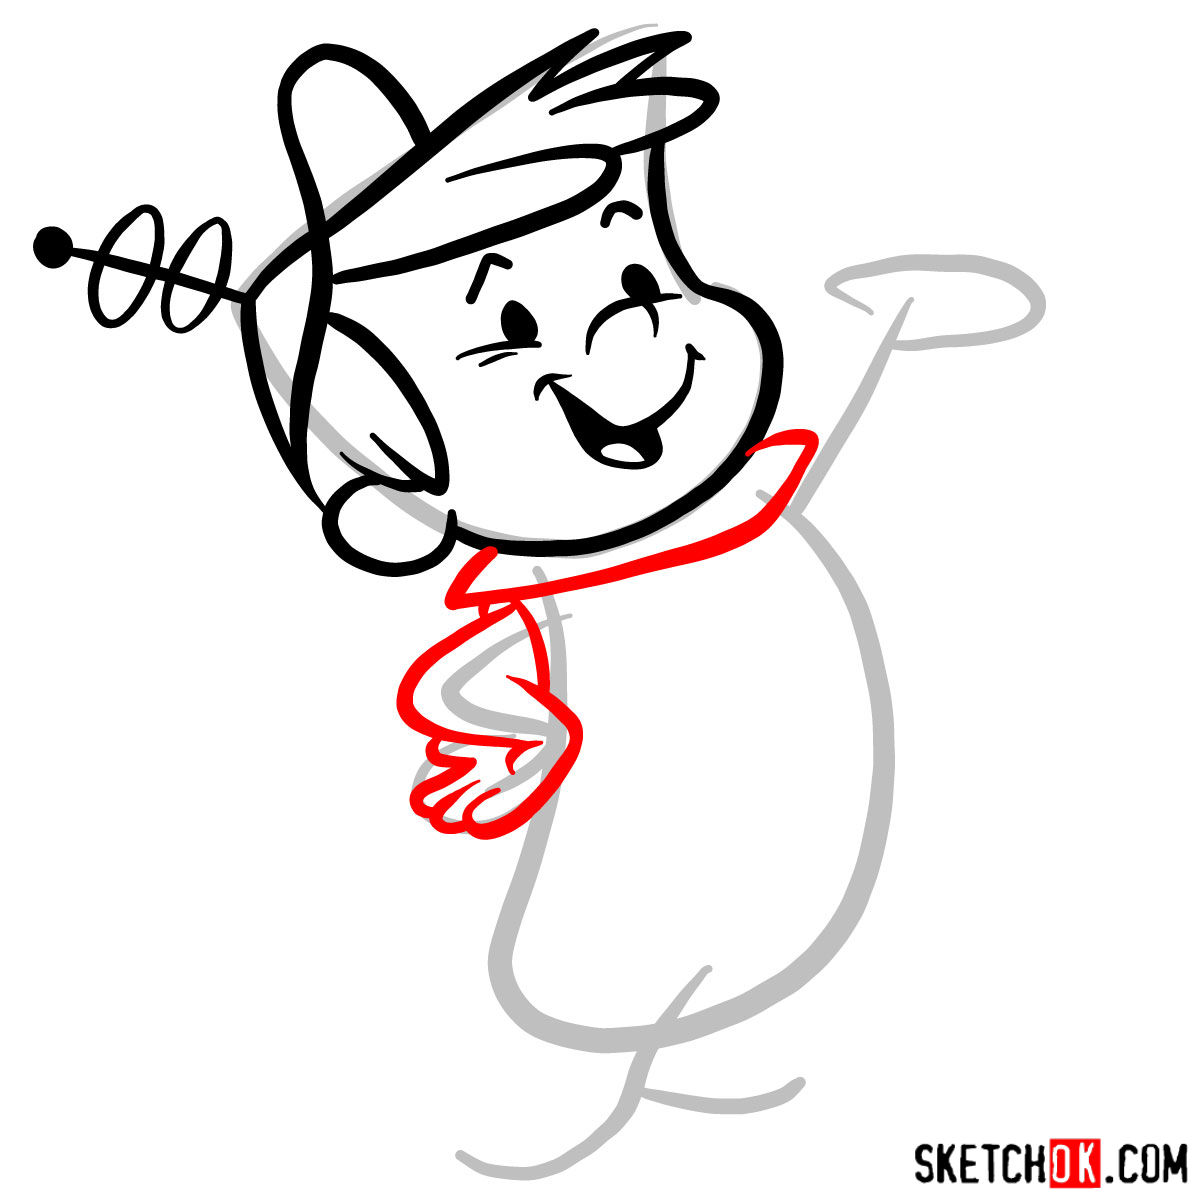 How to draw Elroy Jetson - step 05